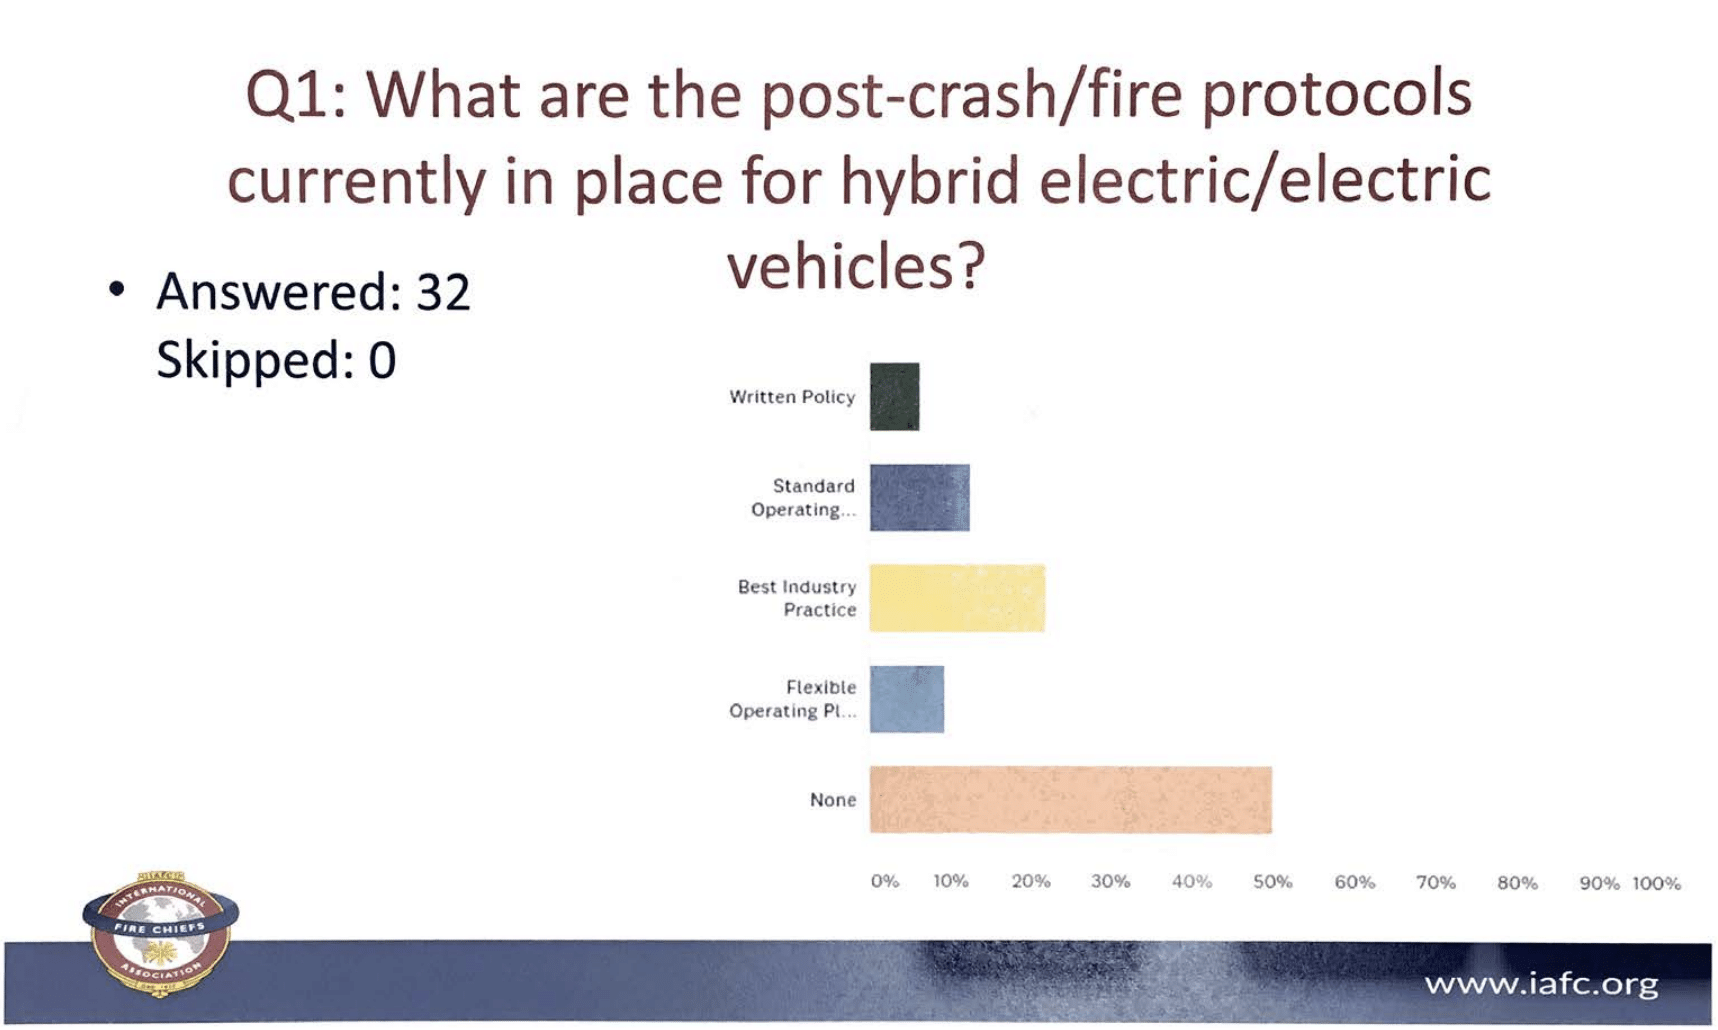 NTSB report says EV fires are a major weak point for Fire Departments